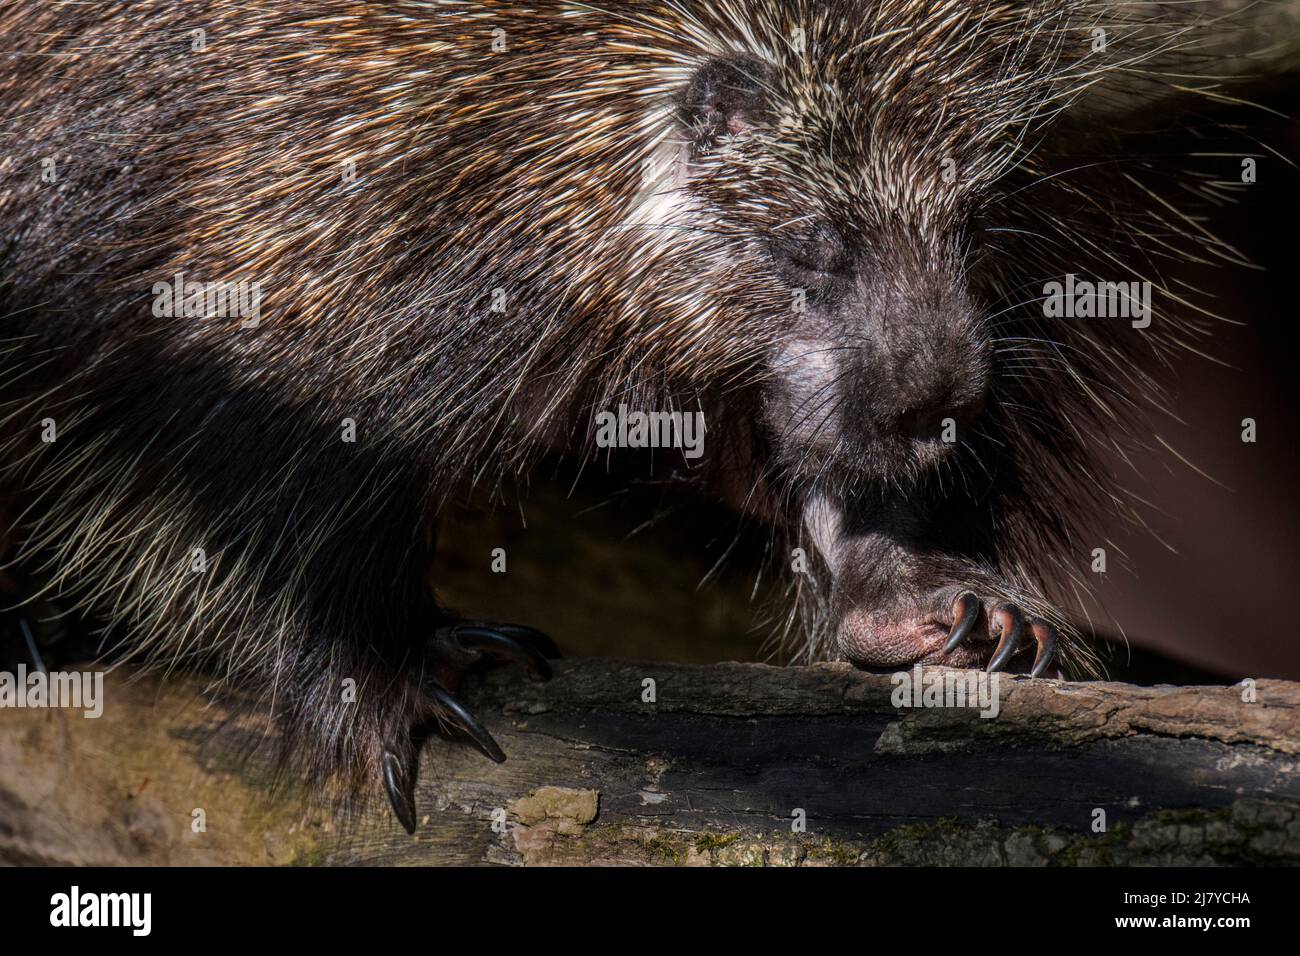 North American porcupine / Canadian porcupine (Erethizon dorsatum) foraging and showing claws, native to North America Stock Photo